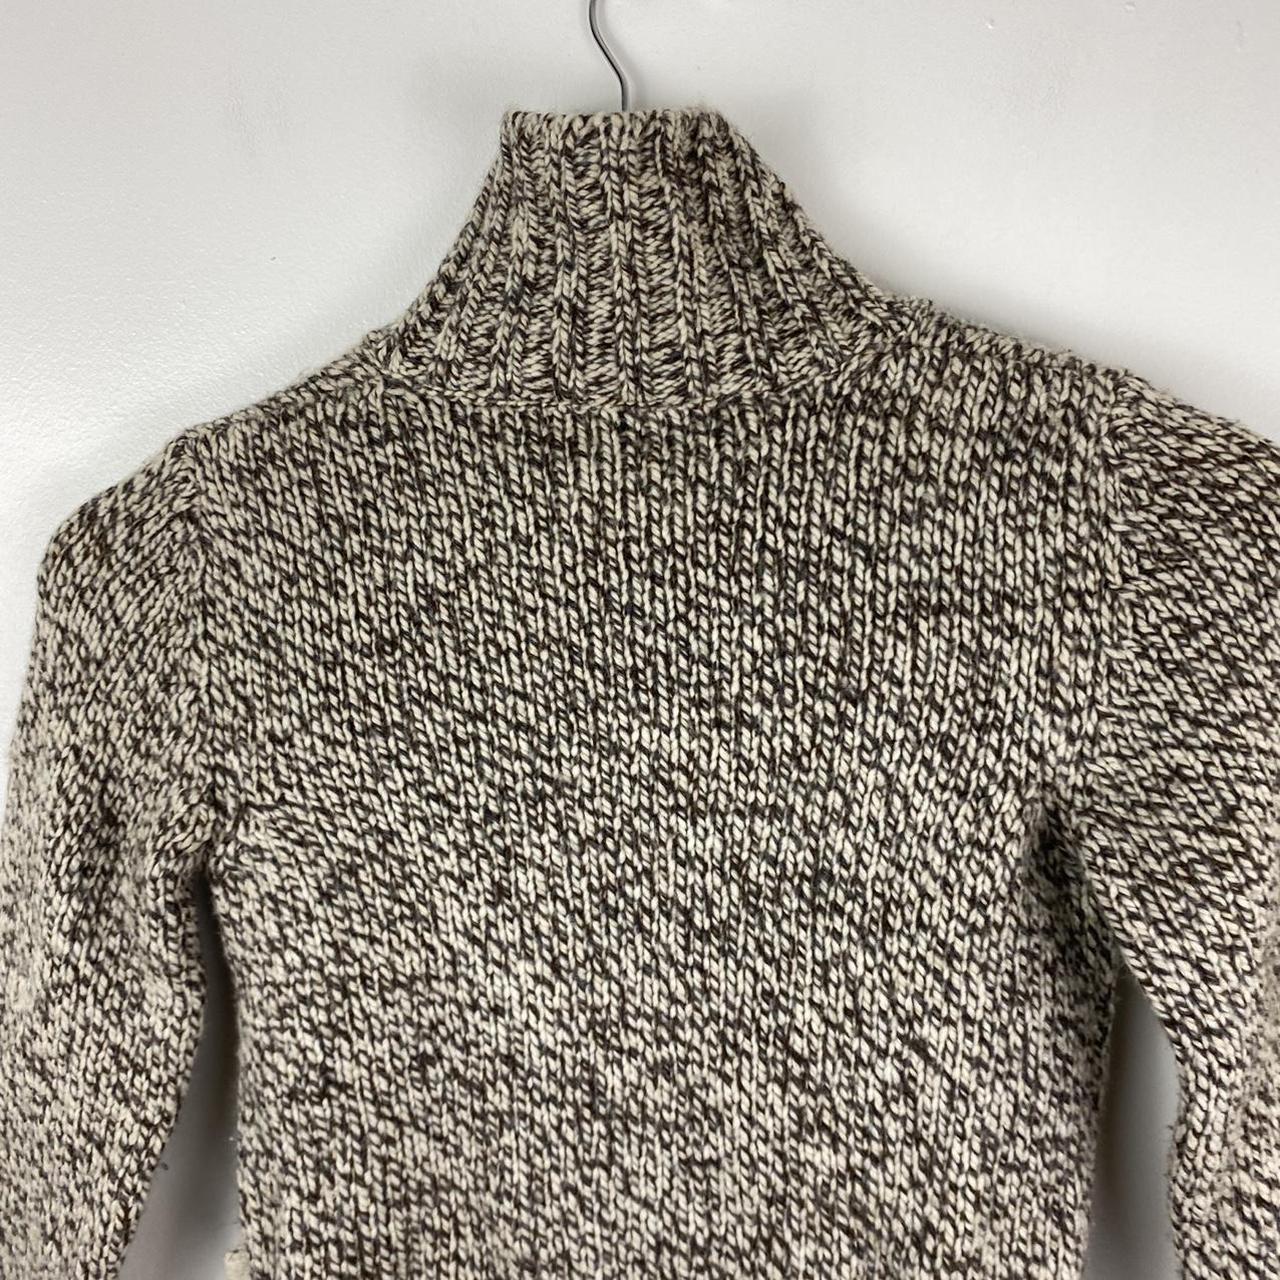 Just Chunky Knit Button Up Jumper Knitted Cardigan... - Depop